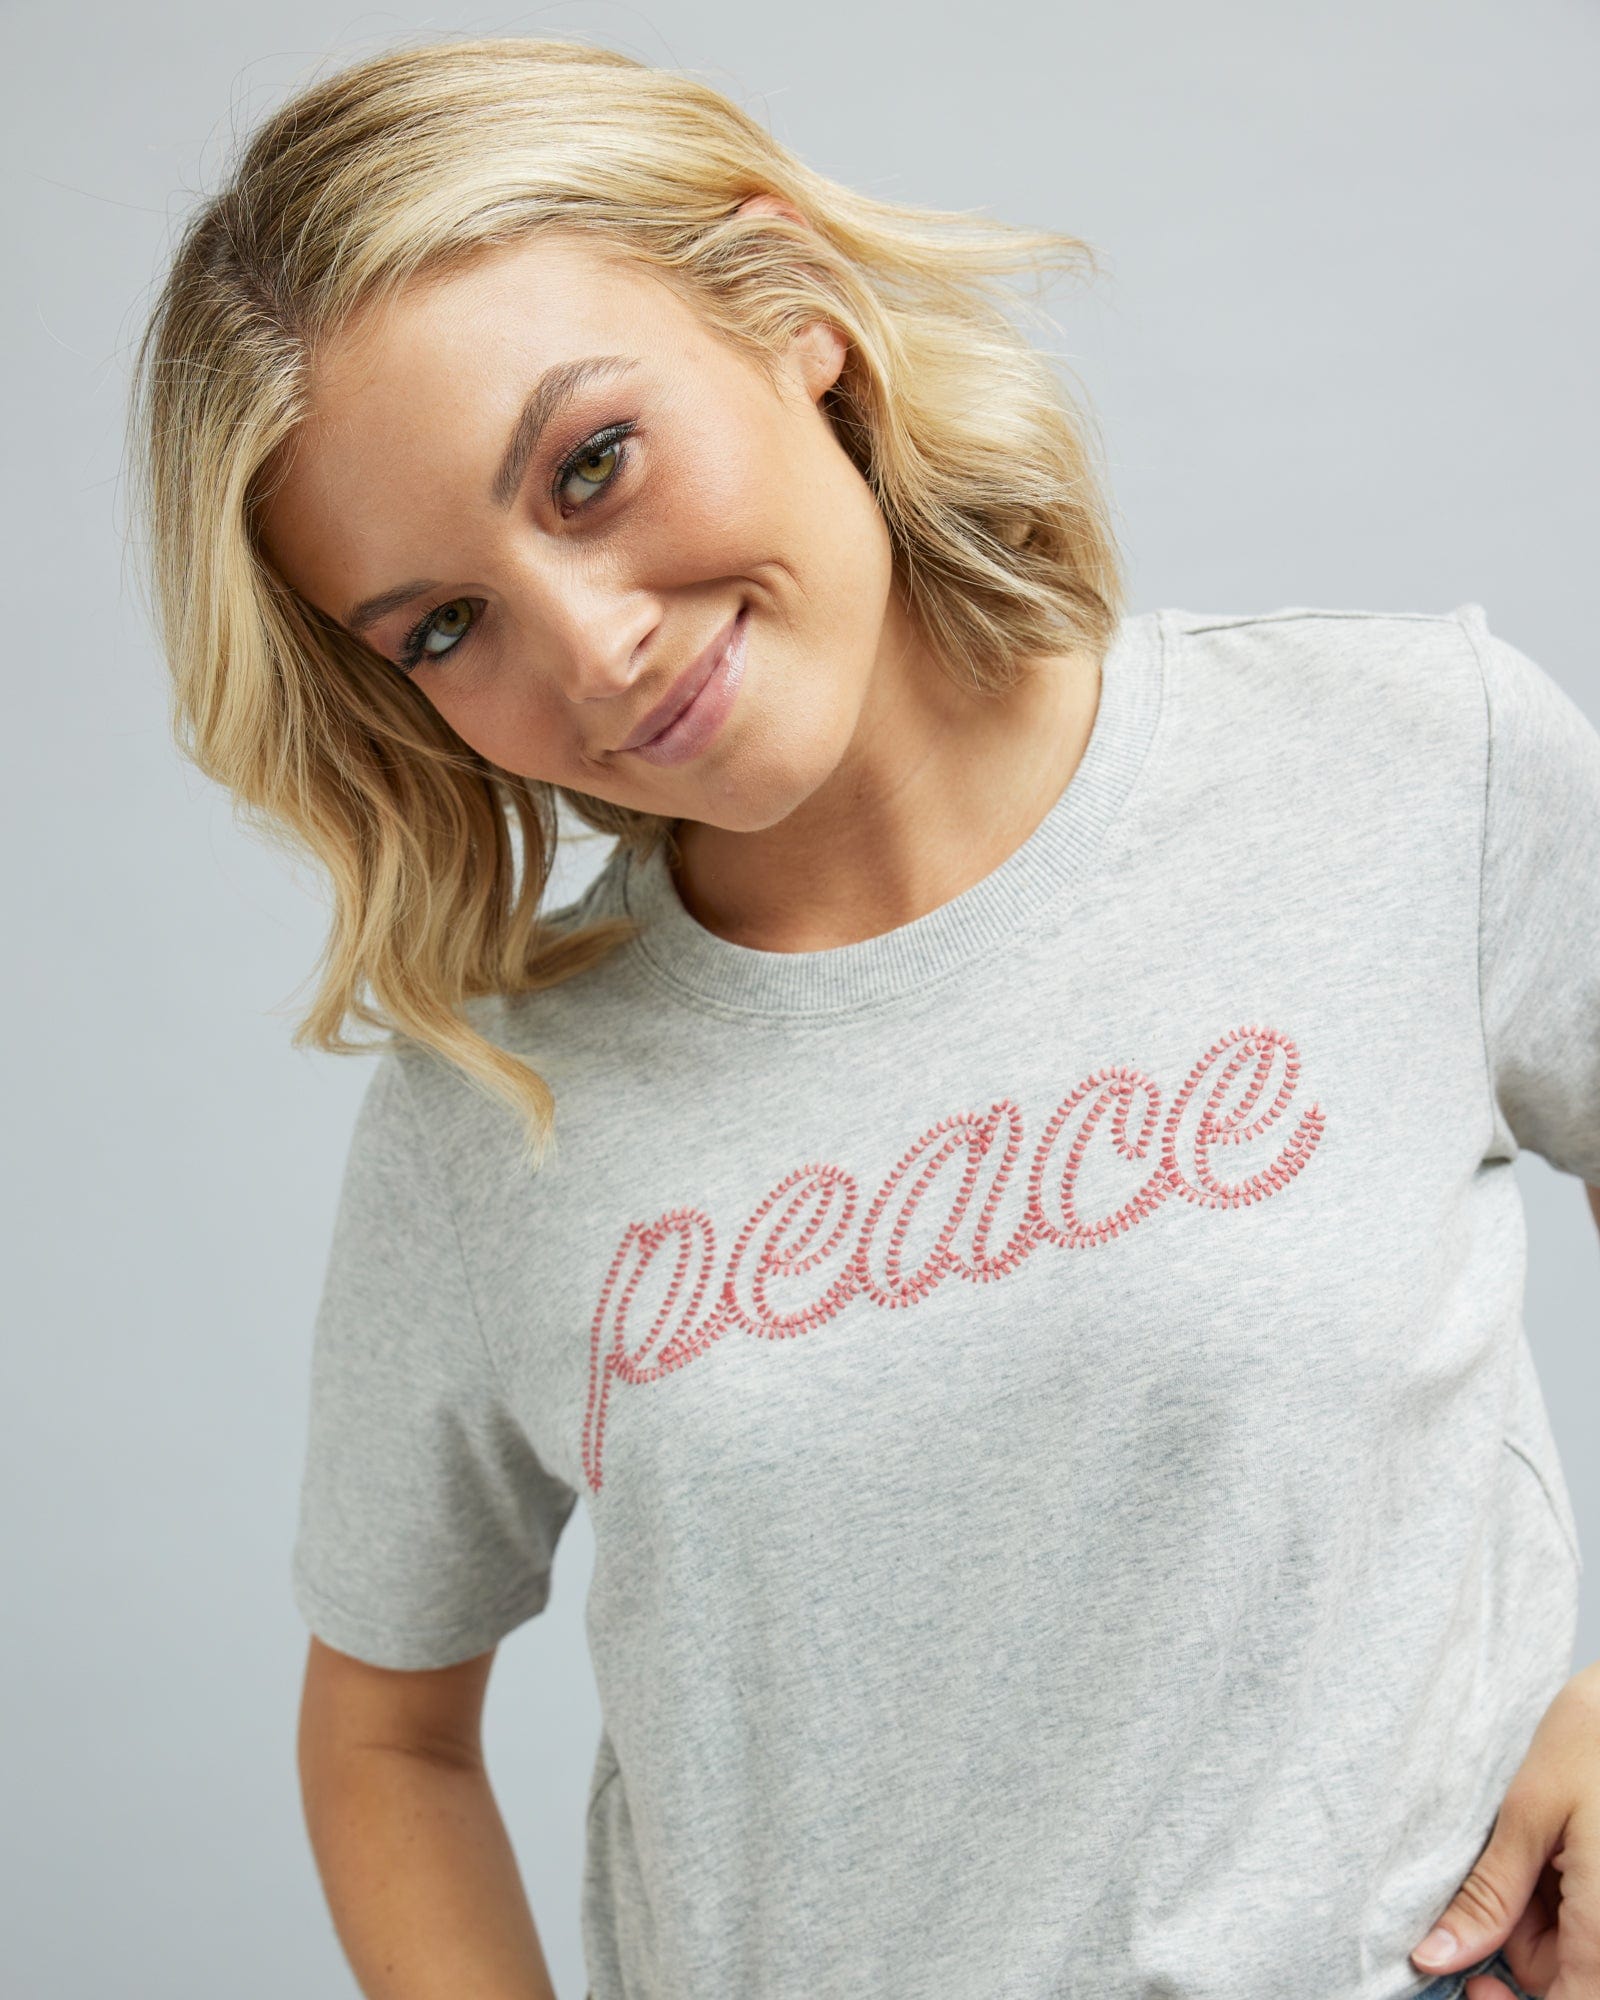 Woman in a short sleeve graphic tee that says "peace"